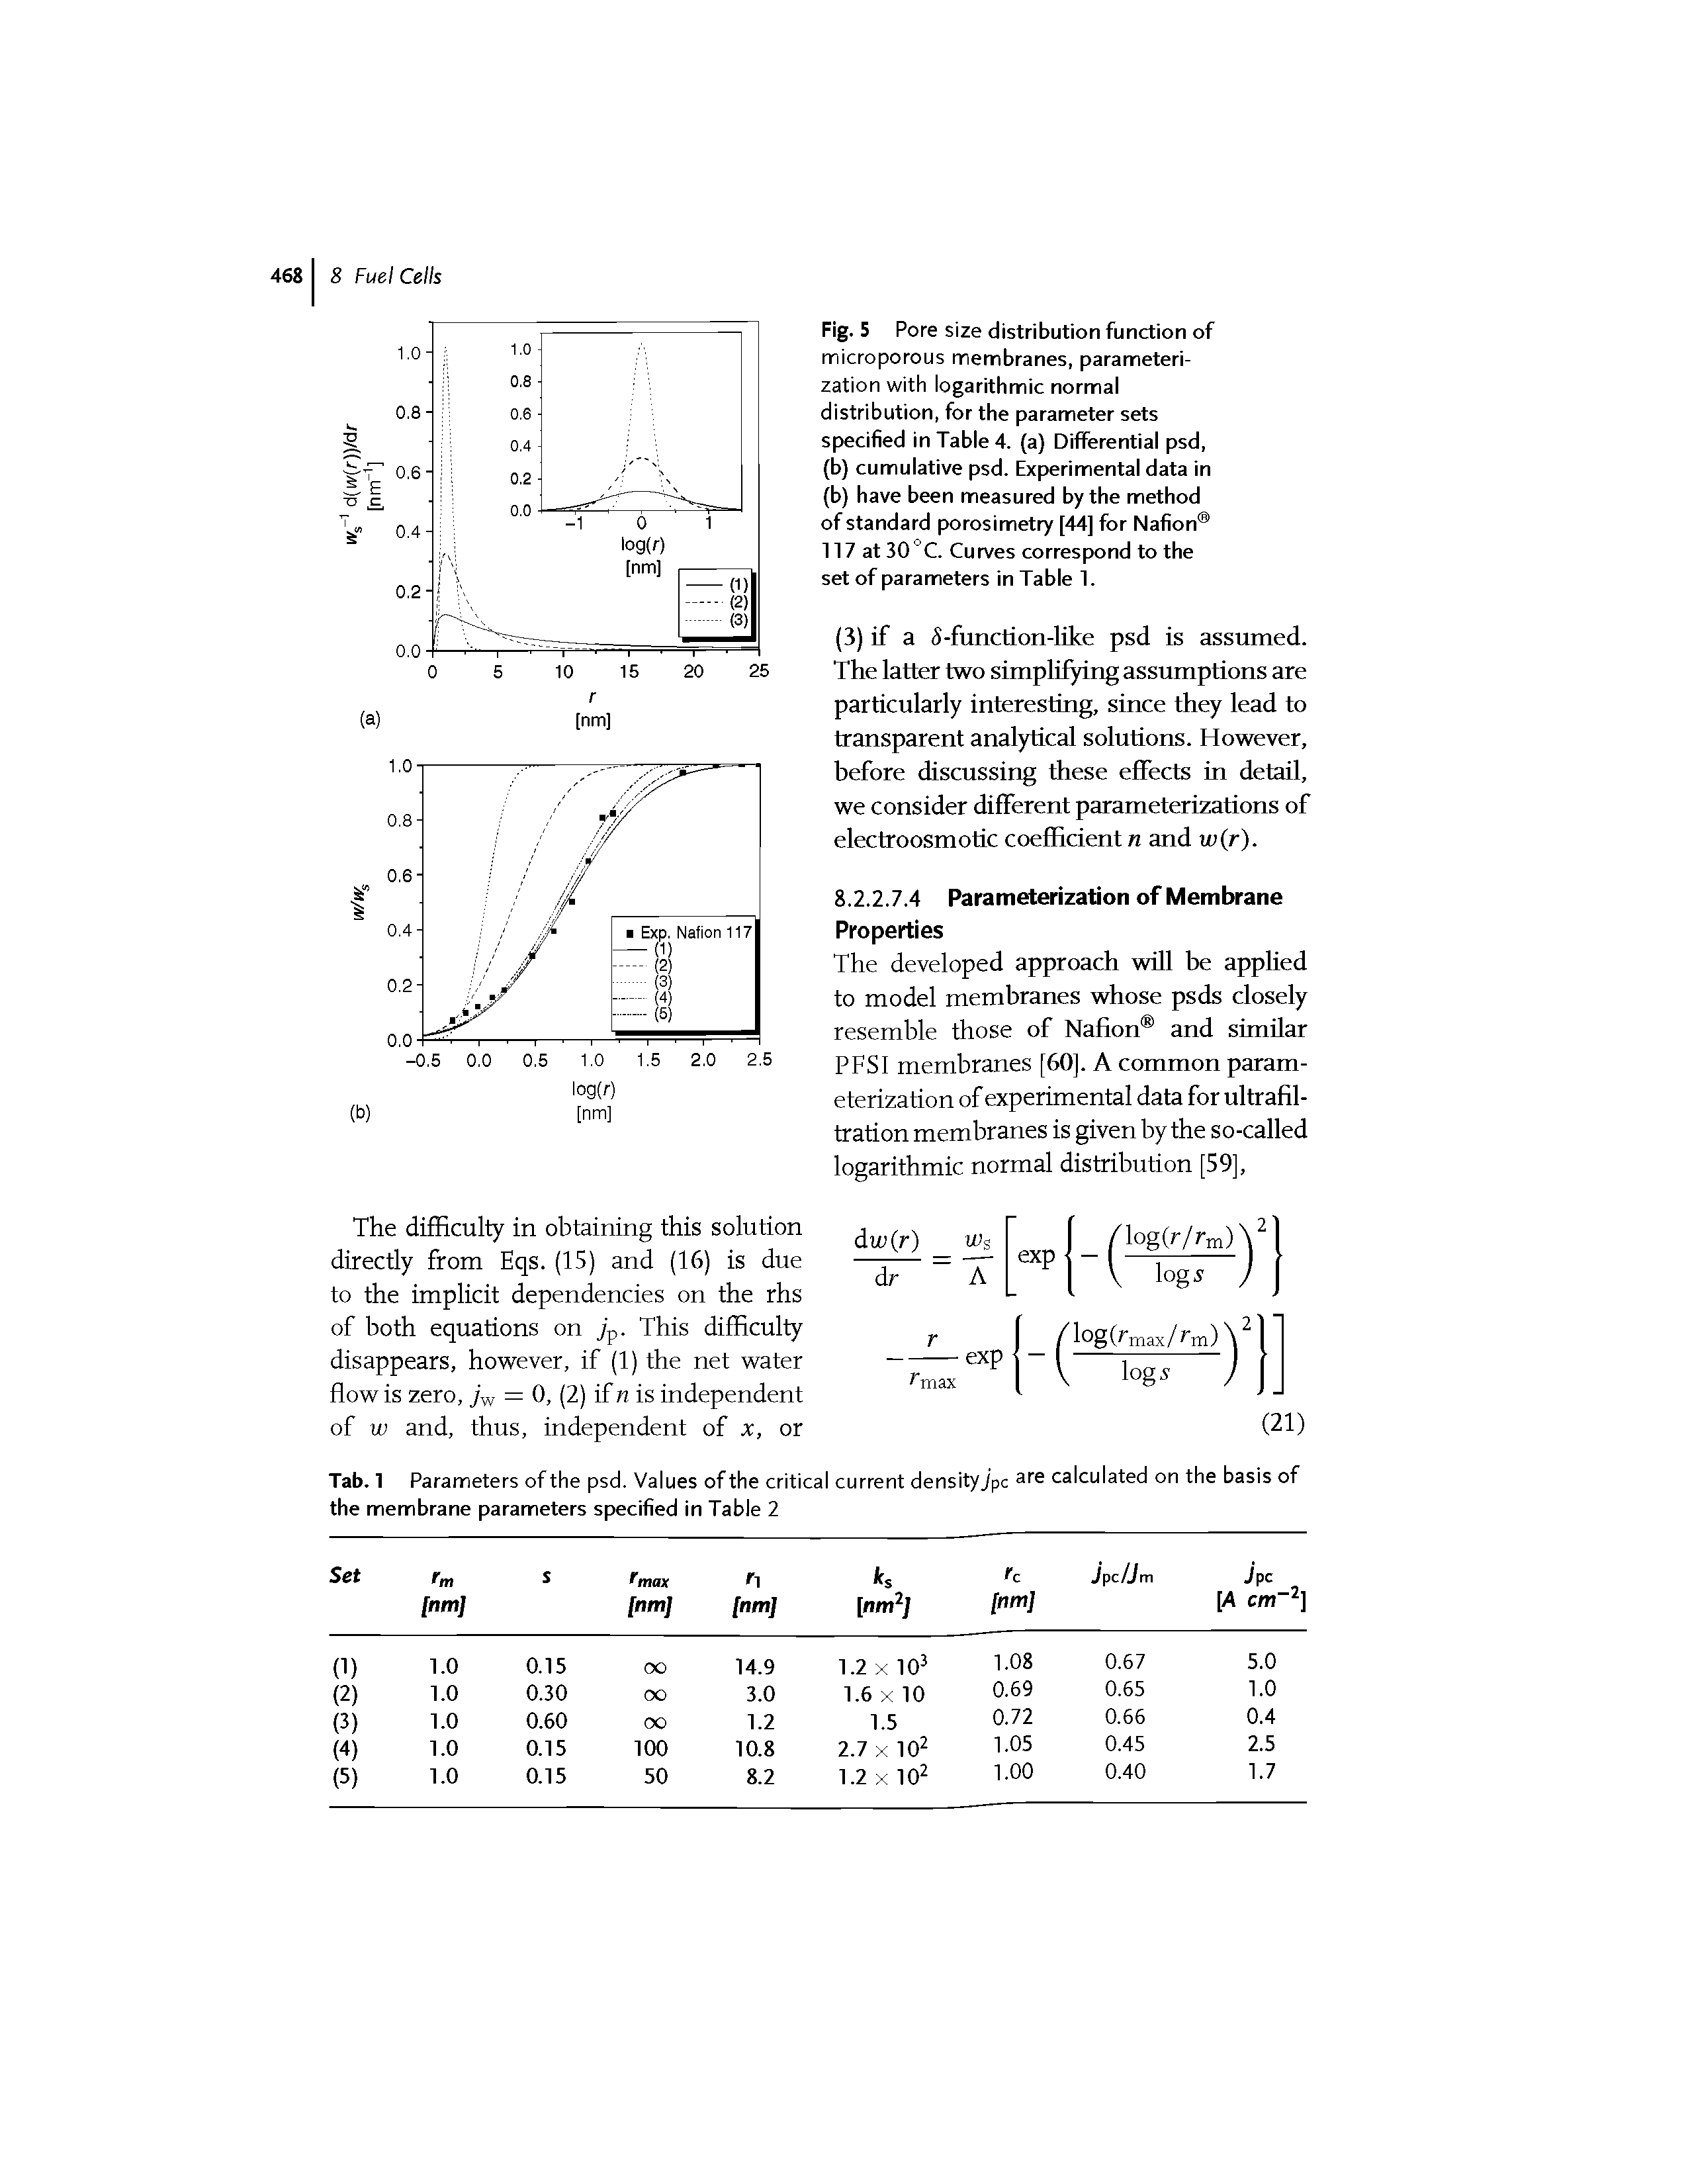 Fig. 5 Pore size distribution function of microporous membranes, parameterization with logarithmic normal distribution, for the parameter sets specified in Table 4. (a) Differential psd,...